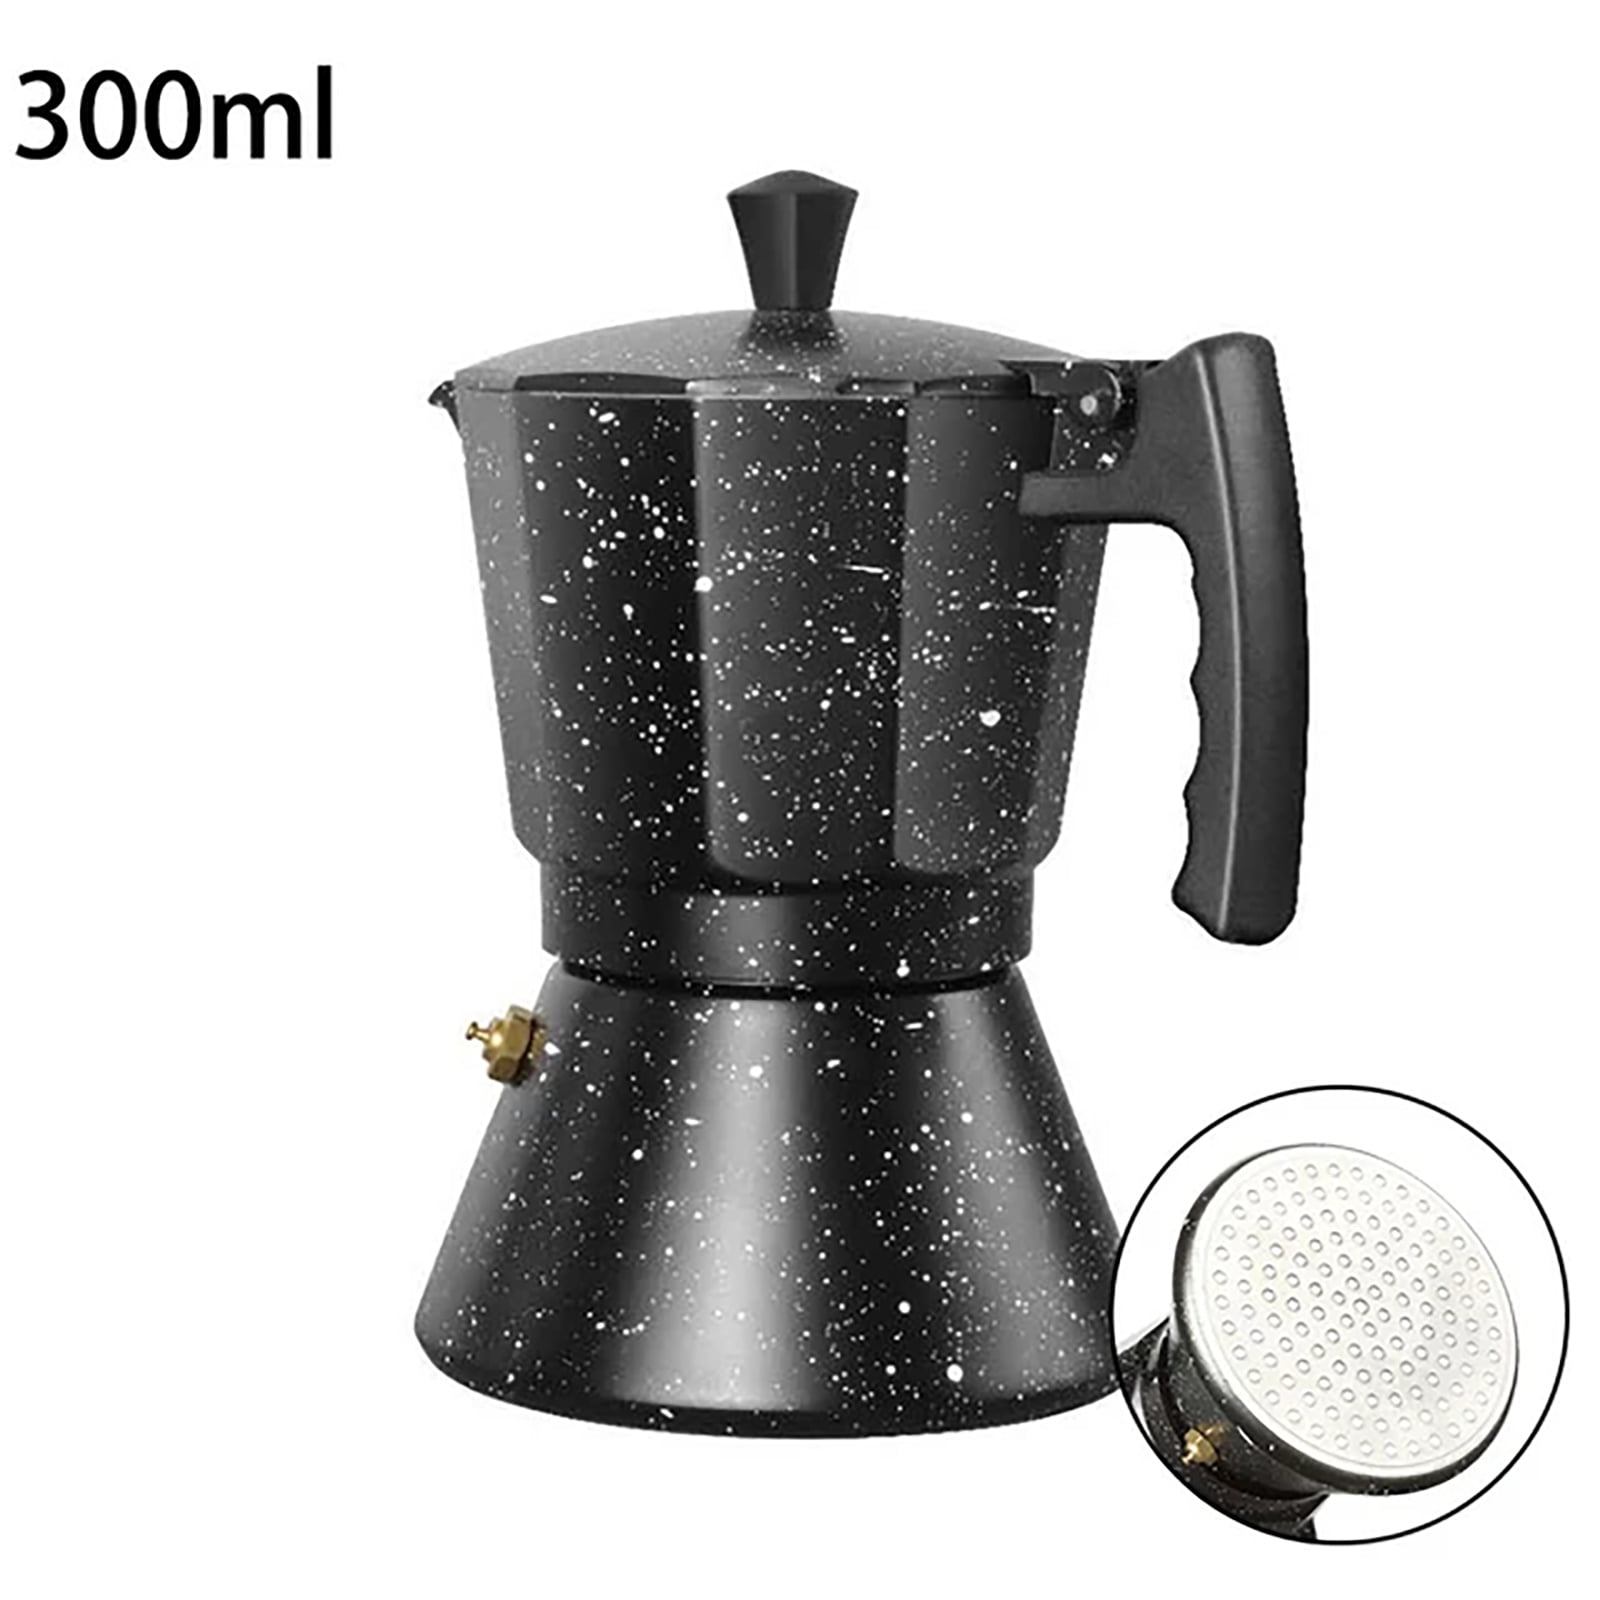 Maple Star Stainless Steel Stovetop Espresso Coffee Maker Moka Pot  200ml/6.7oz/4 cup (Espresso Cup=50m)for Induction Gas and all Stoves